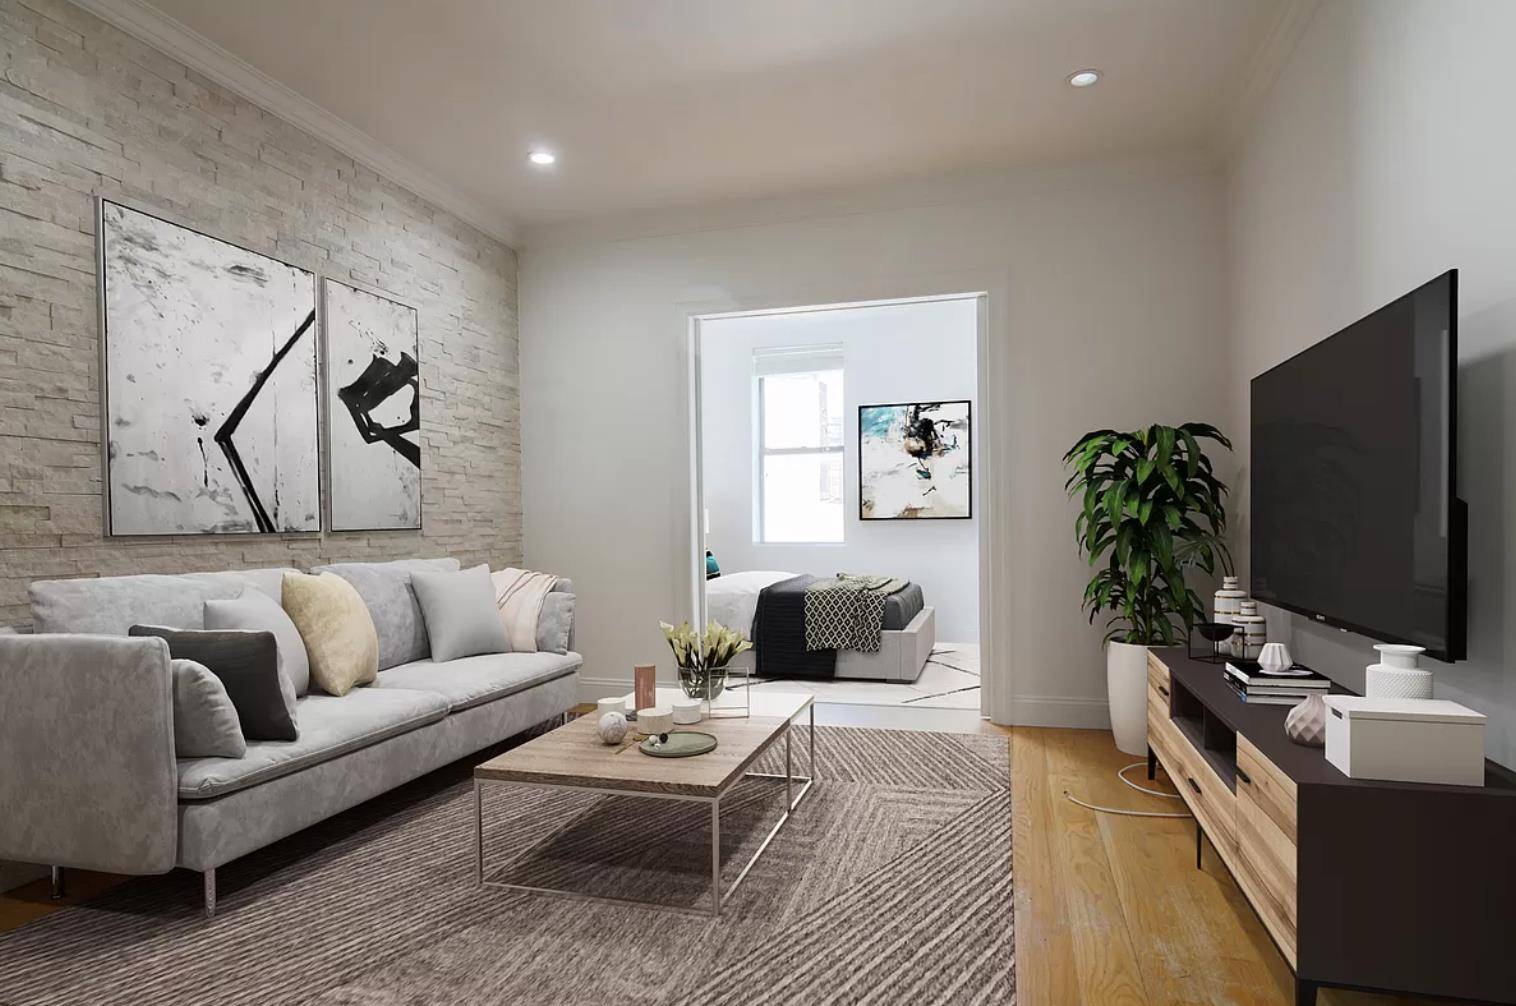 Move into this beautifully renovated one bedroom home situated in the center of the West Village on Carmine Street !